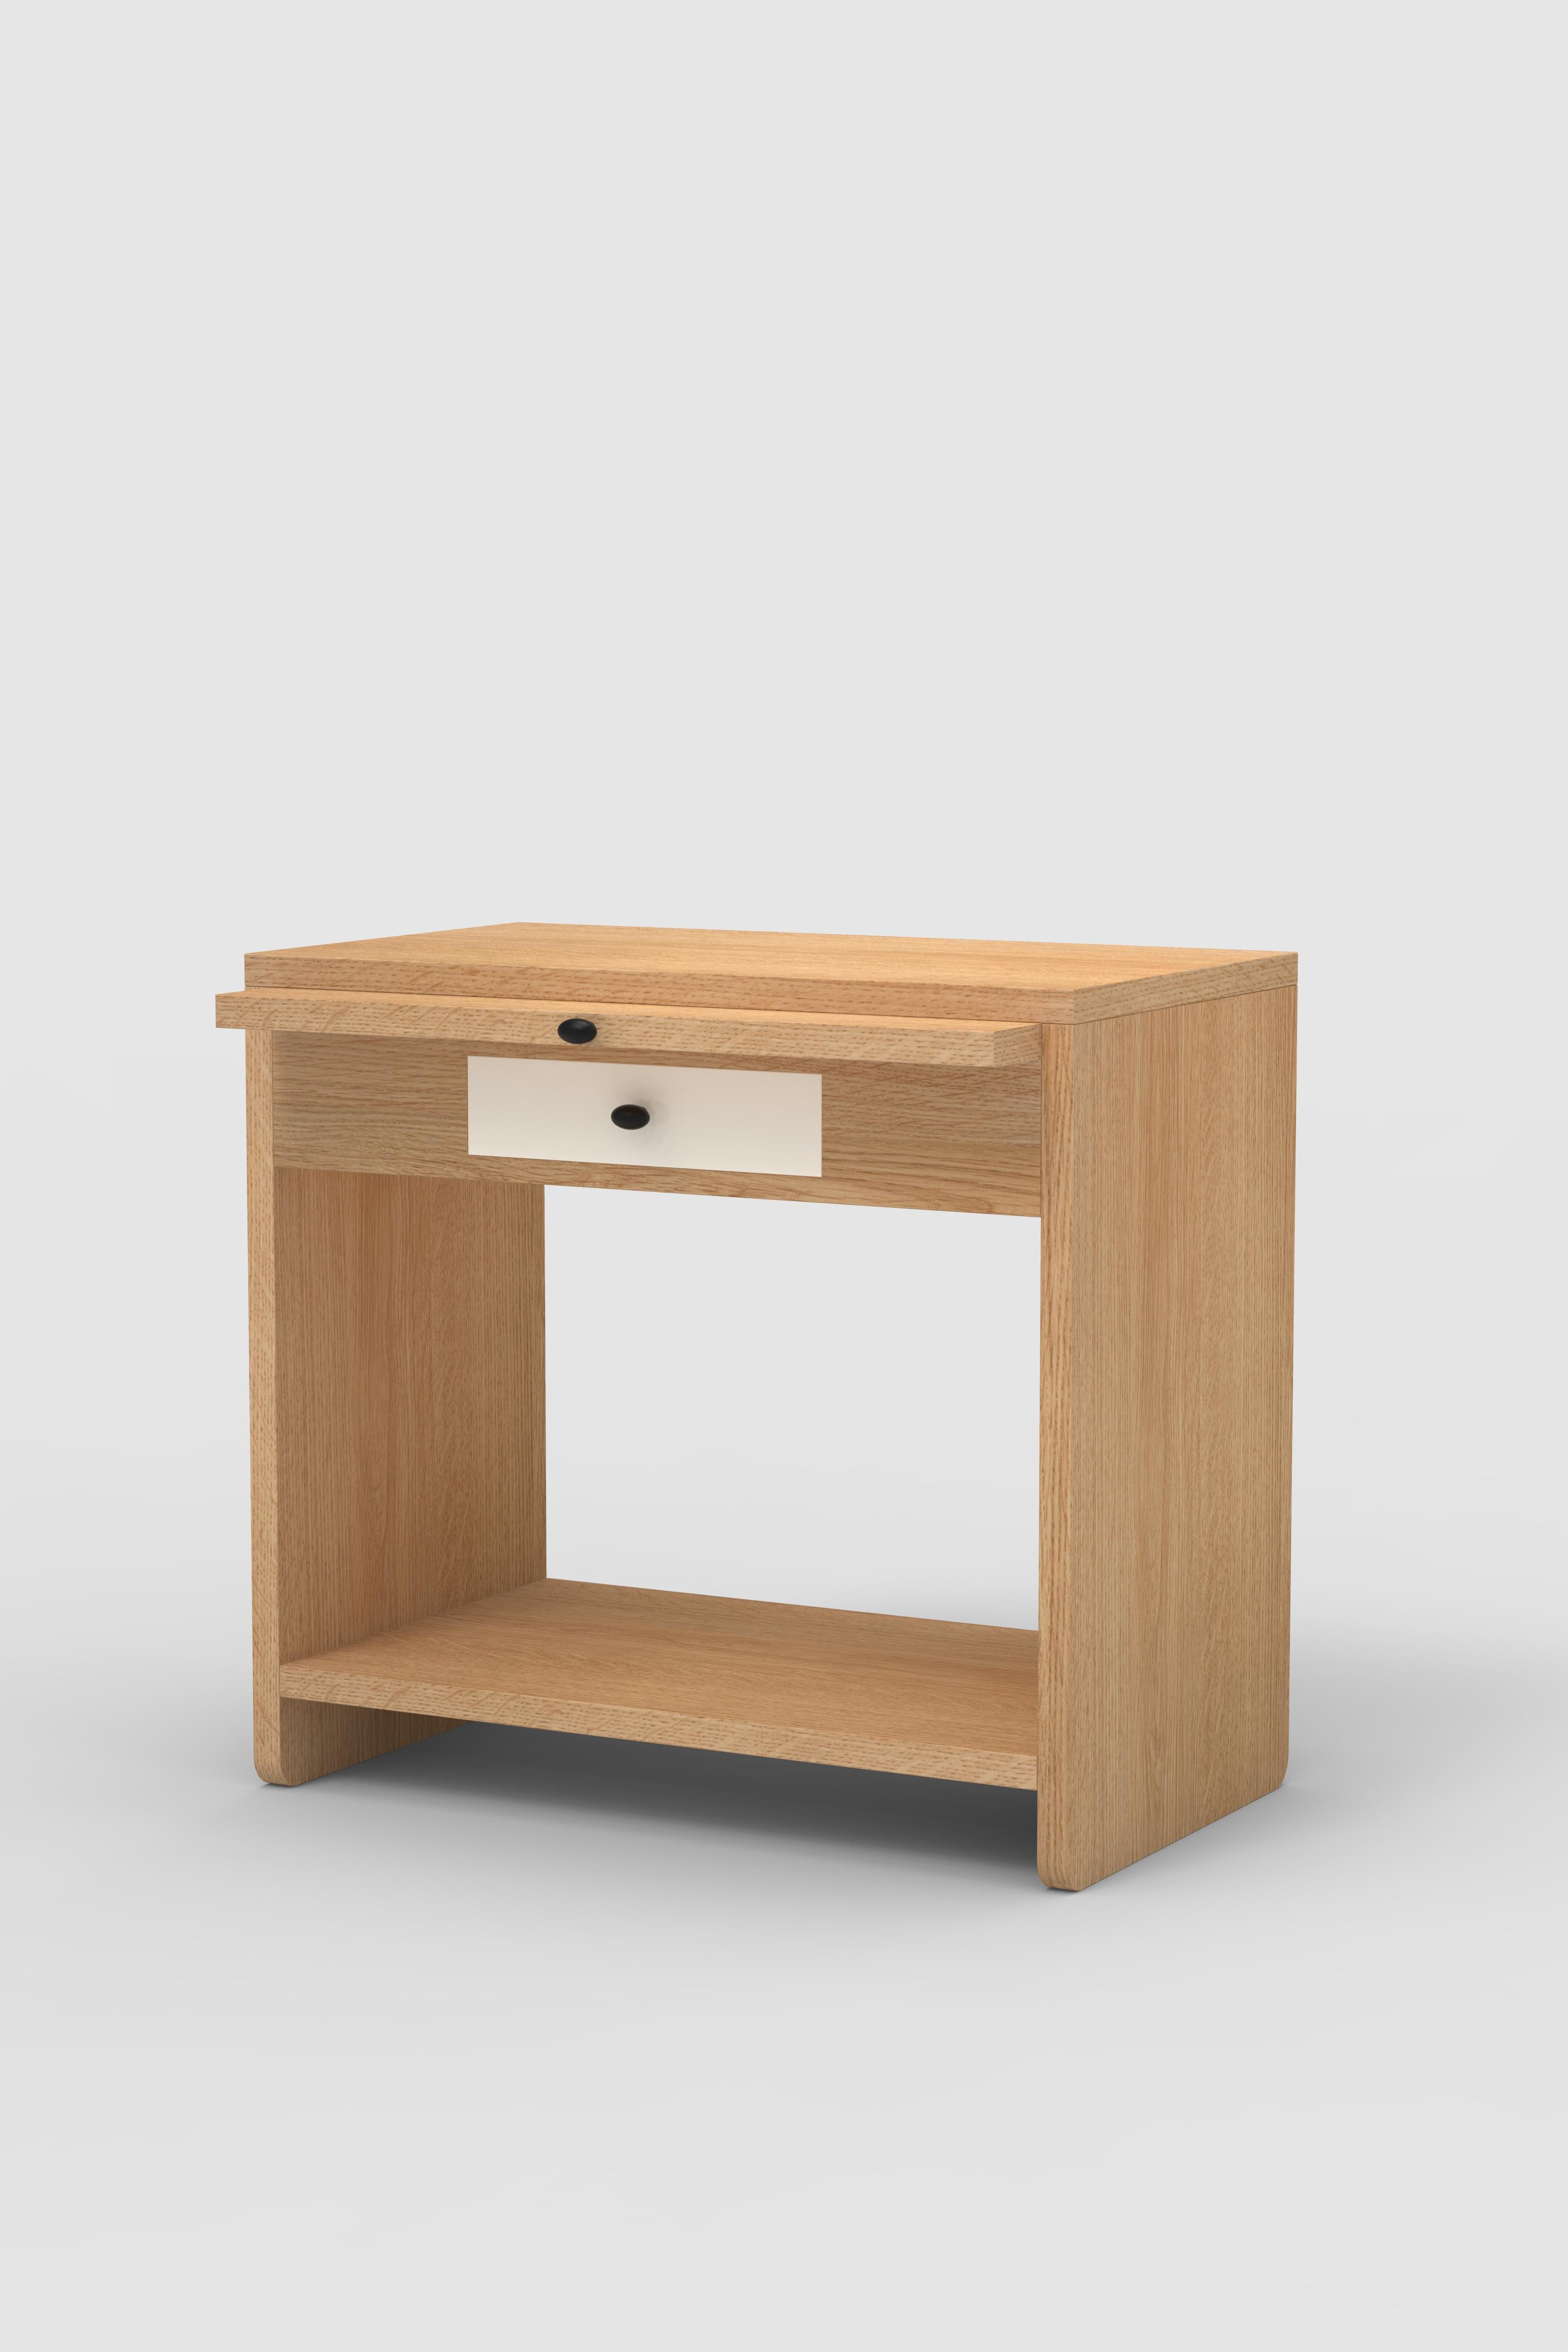 Orphan work 200 Bedside
Shown in oak.
Available in natural oak with white or off-white painted drawer front. 
Measures: 28” W x 16” D x 26” H
small drawer 12